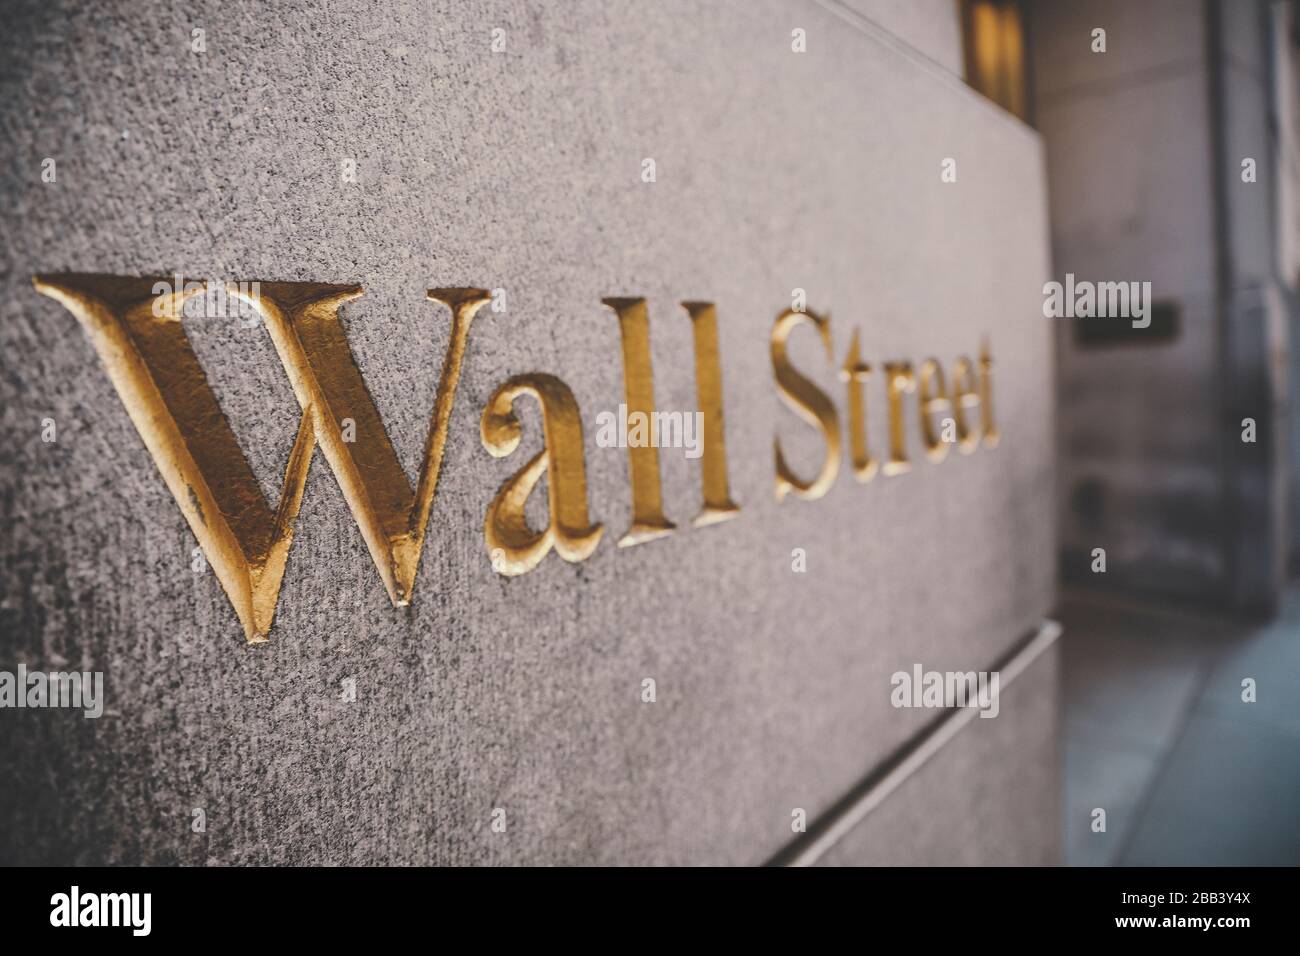 Wall Street se connecter à New York Banque D'Images